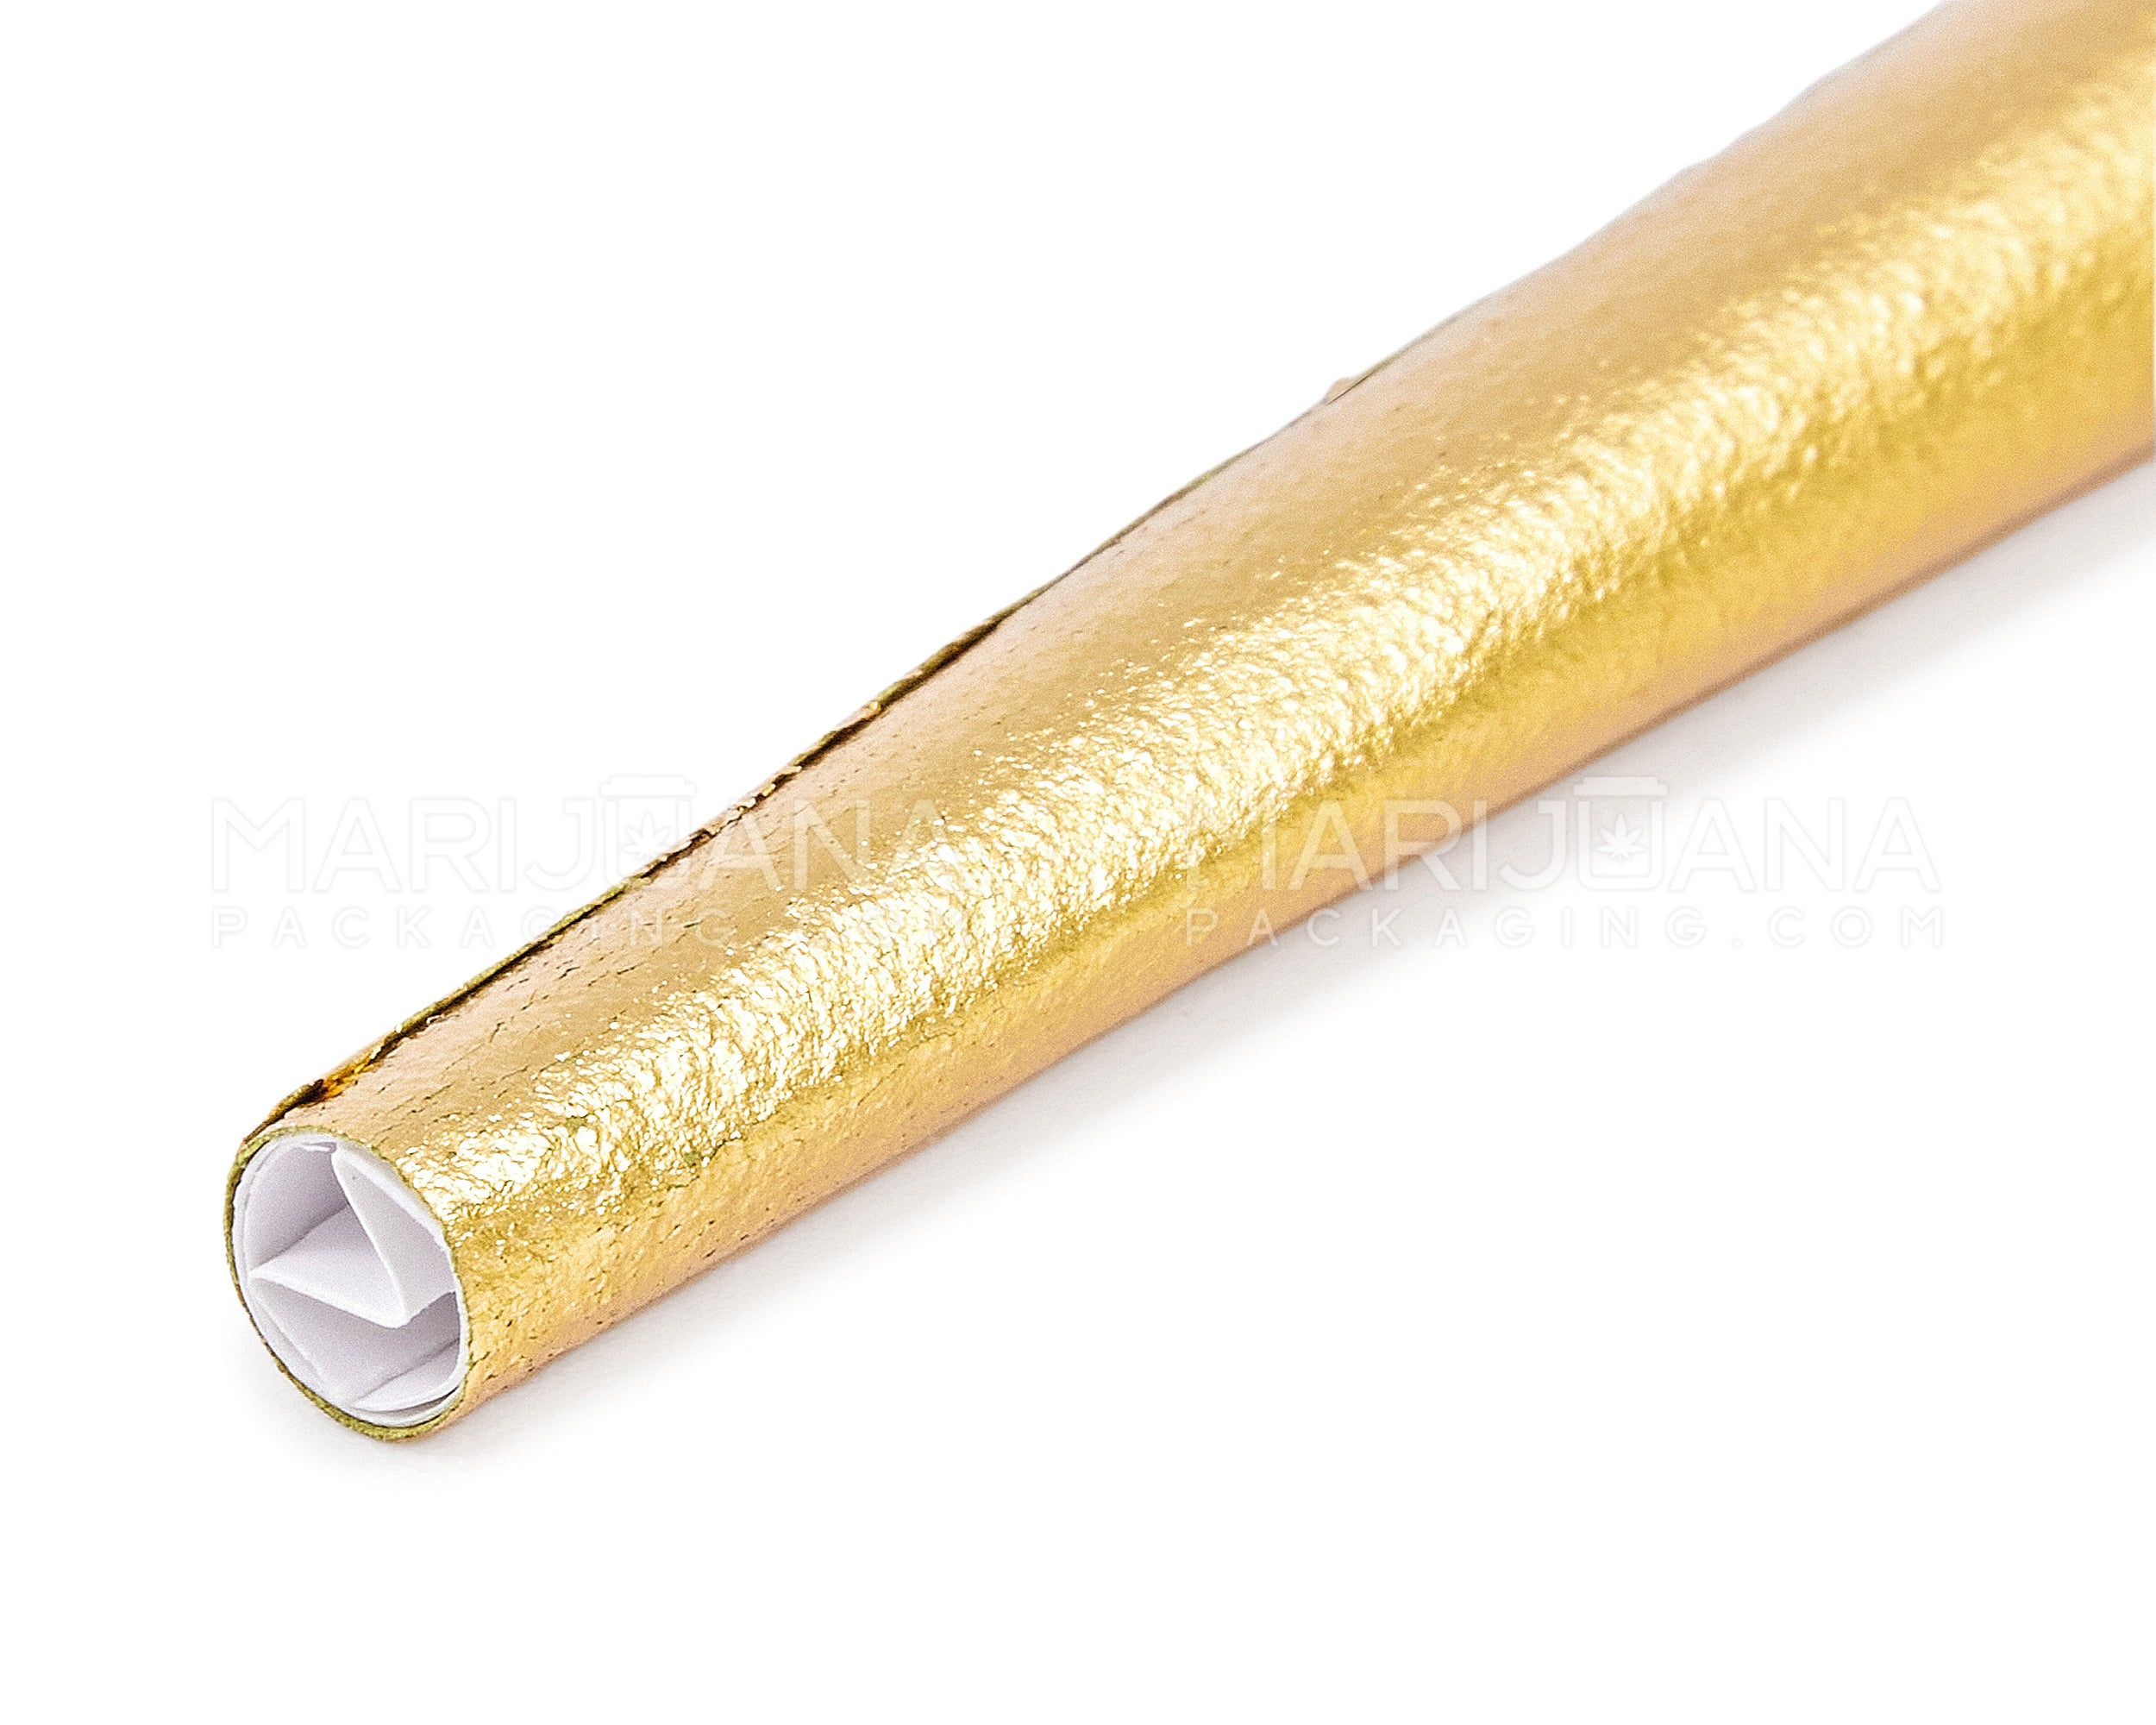 KUSH | 'Retail Display' 24K Gold King Size Hemp Pre Rolled Cones | 63mm - Edible Gold - 8 Count - 5